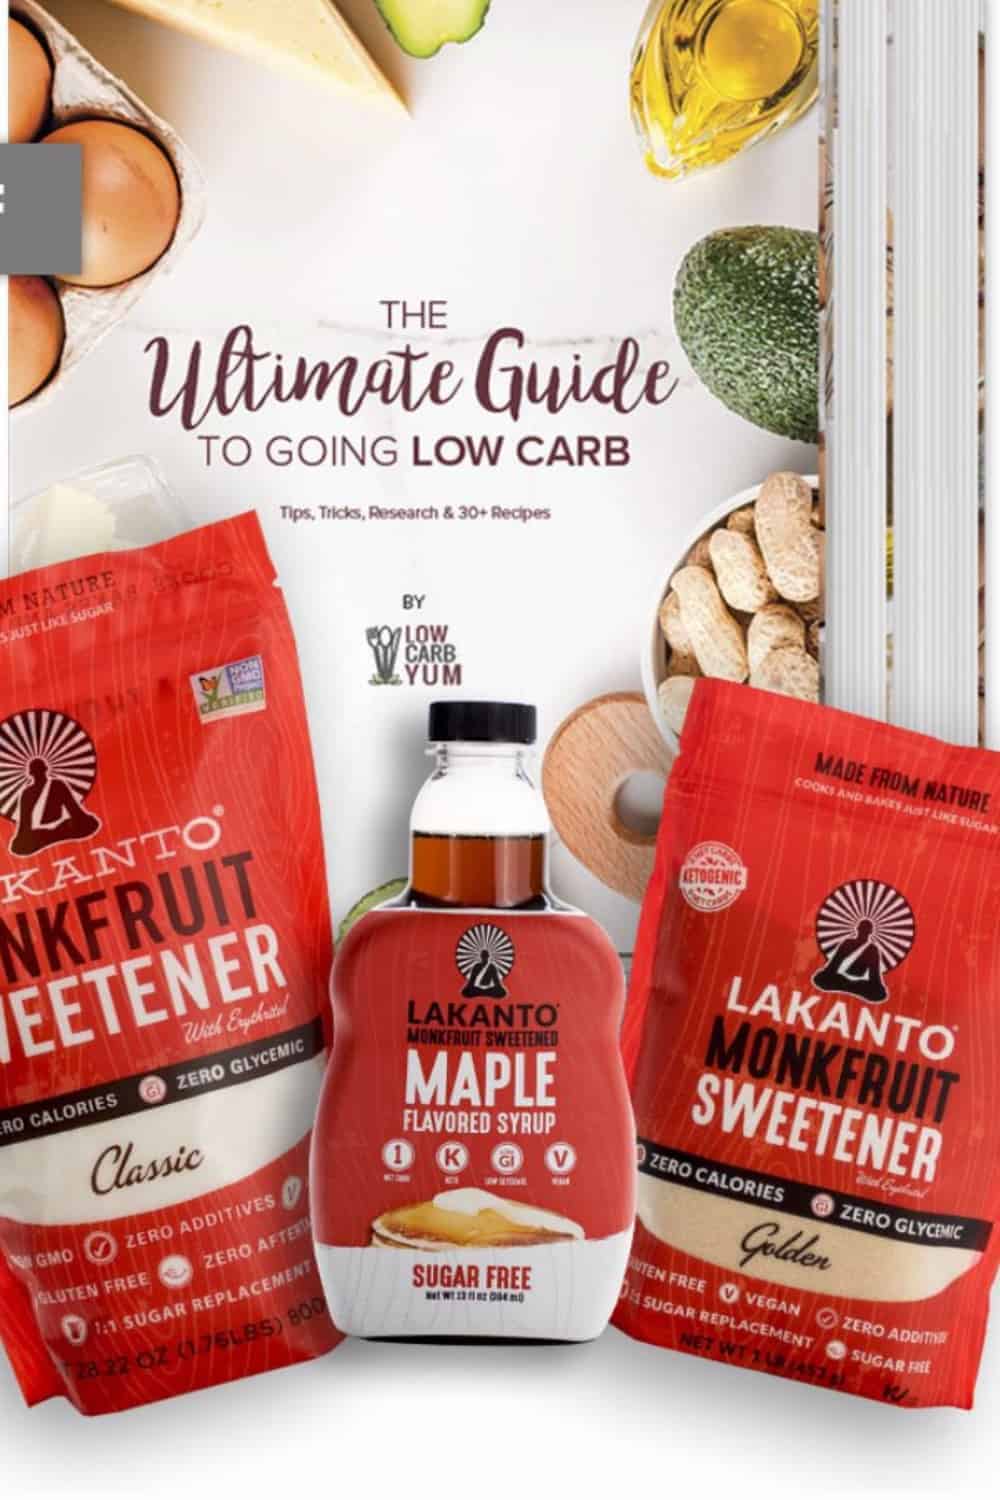 The Ultimate Guide to Going Low Carb Yum and Lakanto Sweetener and maple syrup